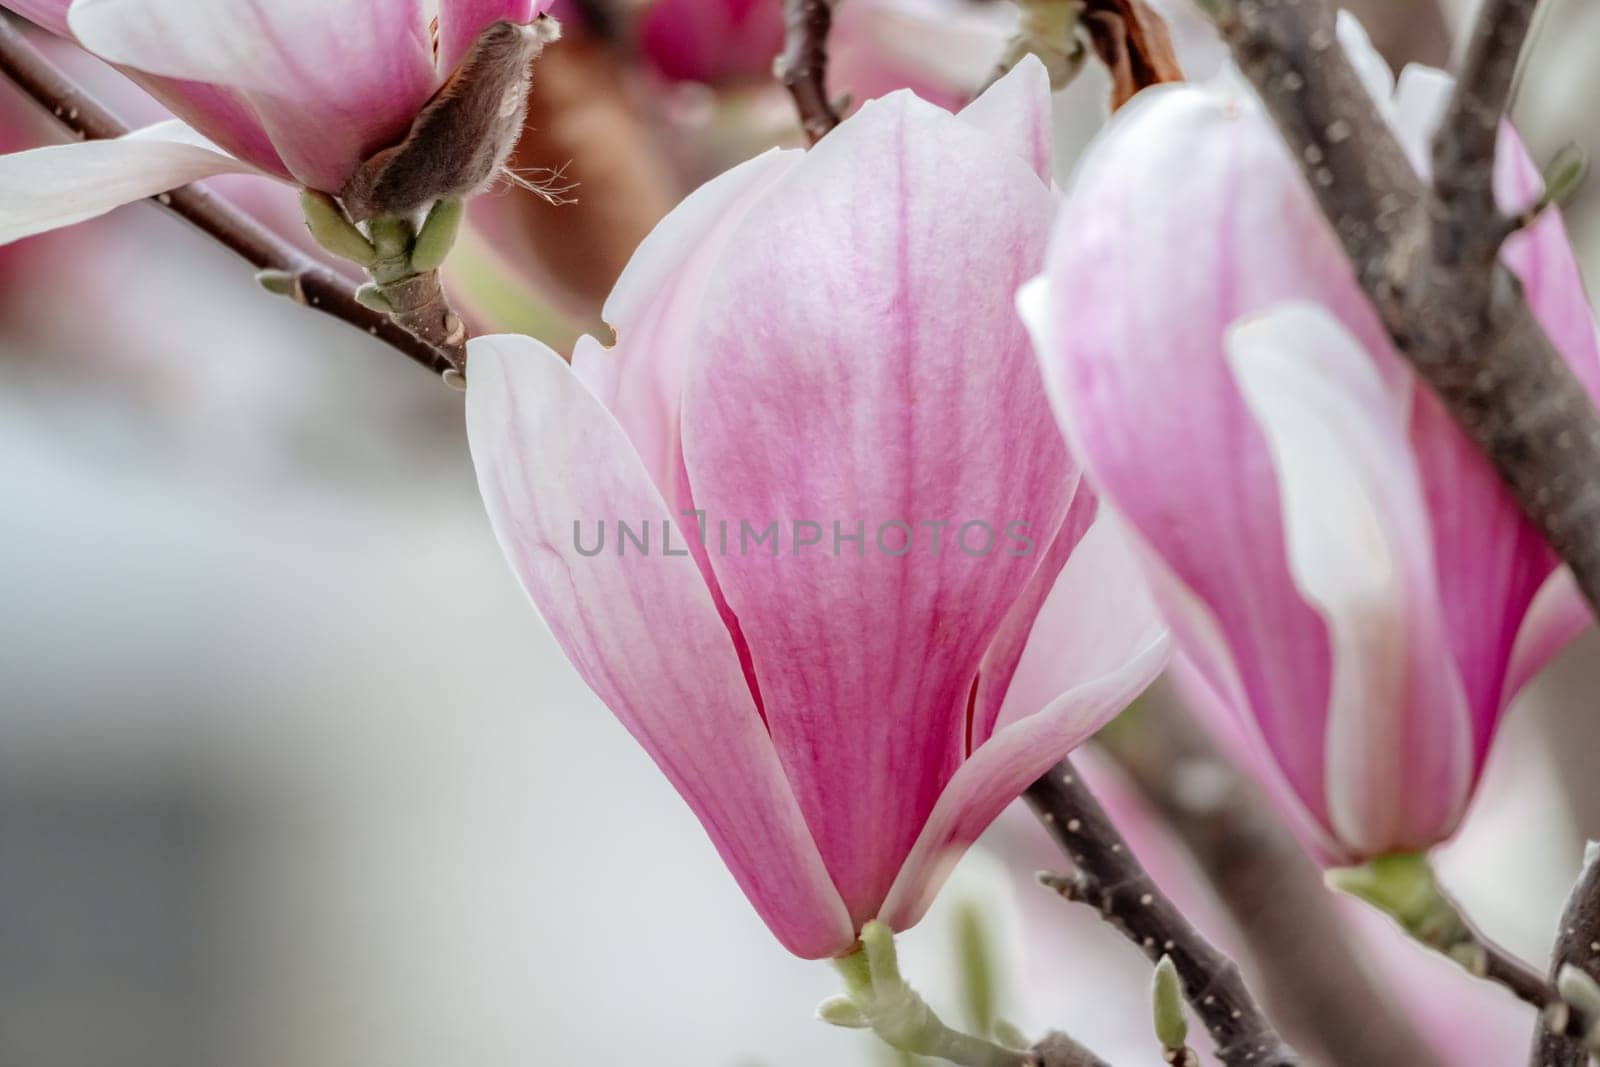 Magnolia Sulanjana flowers with petals in the spring season. the beautiful pink magnolia flowers in spring, selective focusing.